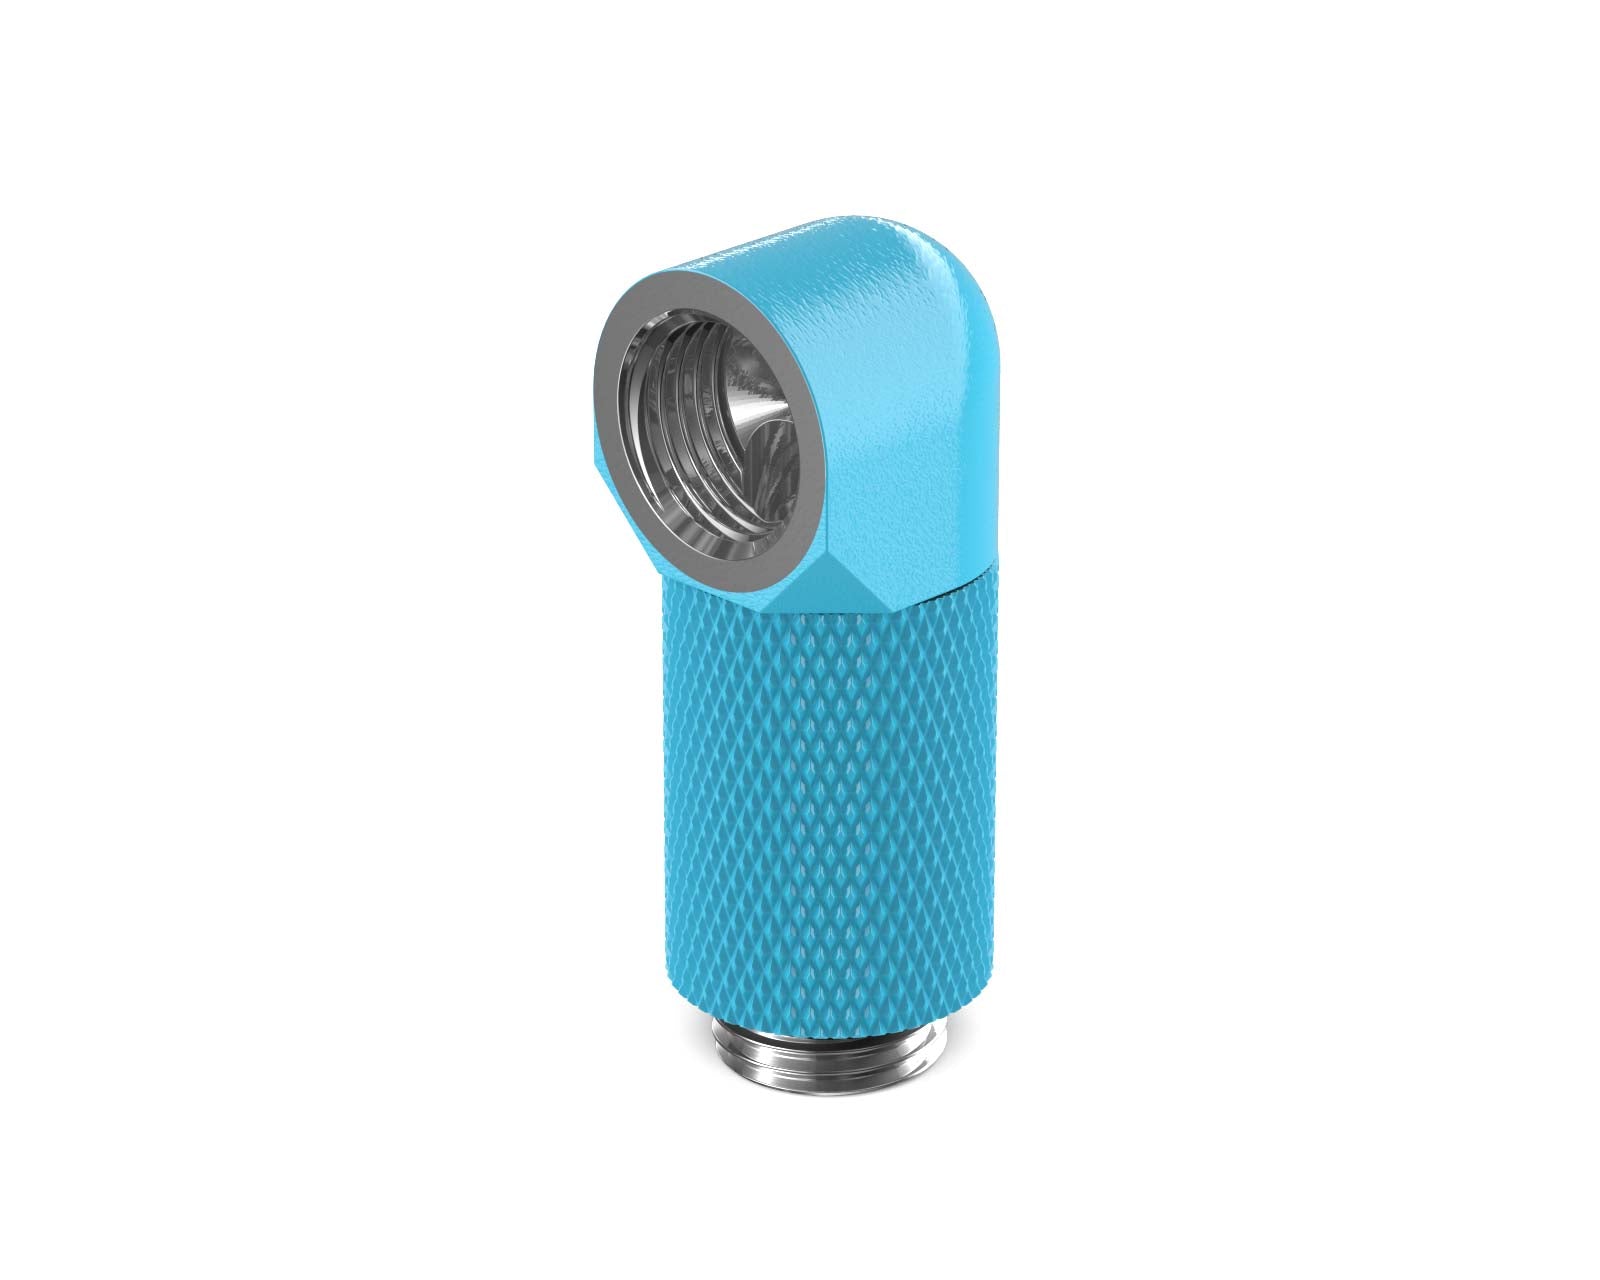 PrimoChill Male to Female G 1/4in. 90 Degree SX Rotary 25mm Extension Elbow Fitting - PrimoChill - KEEPING IT COOL Sky Blue